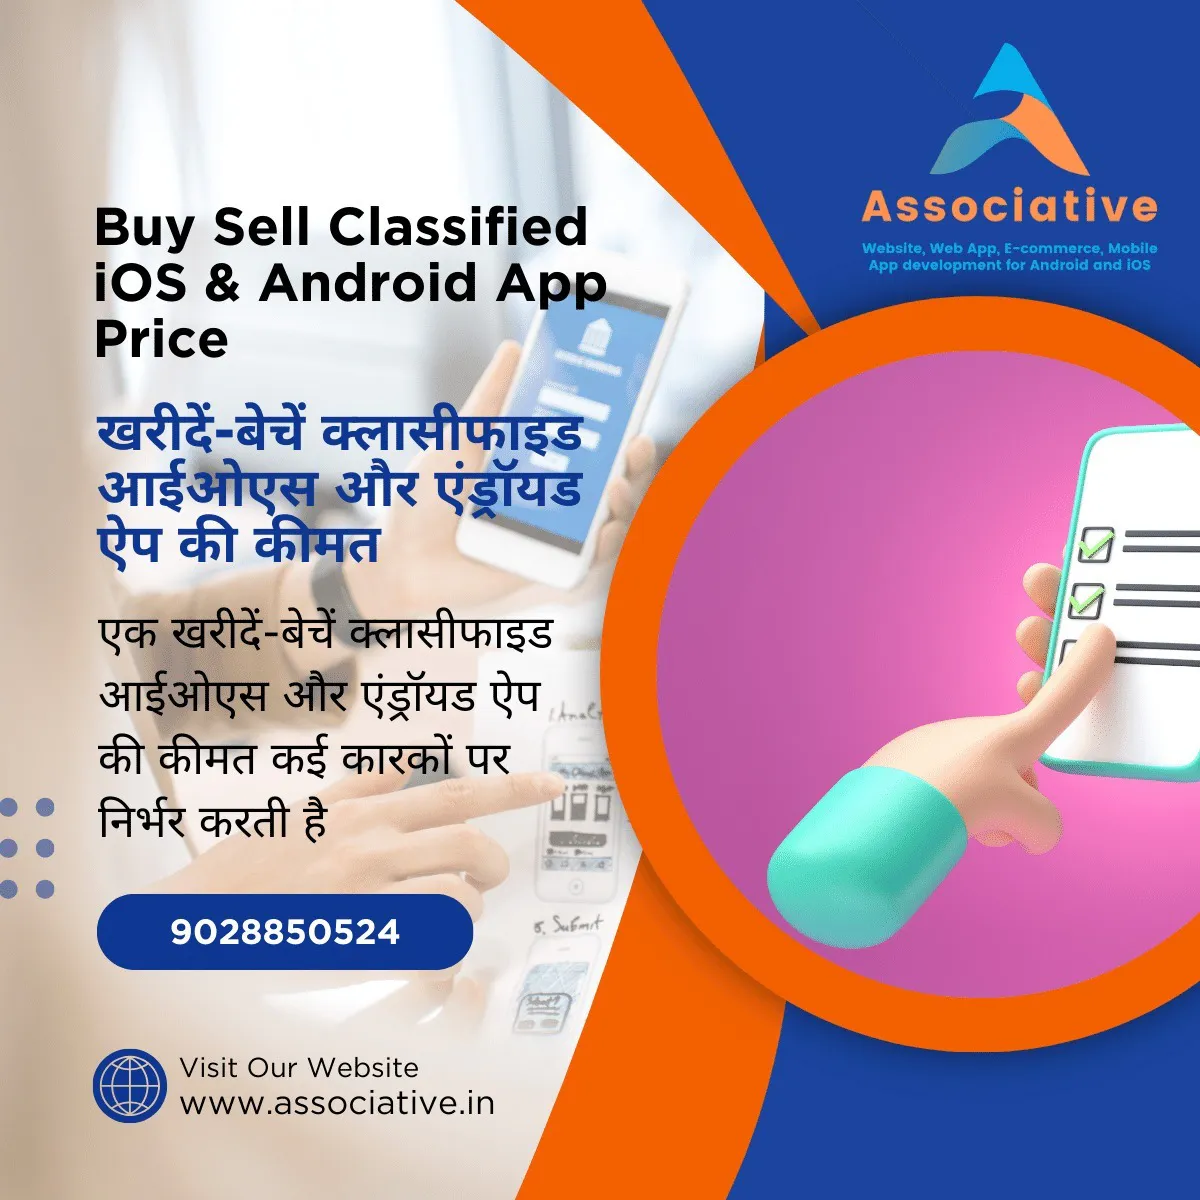 Buy Sell Classified iOS & Android App